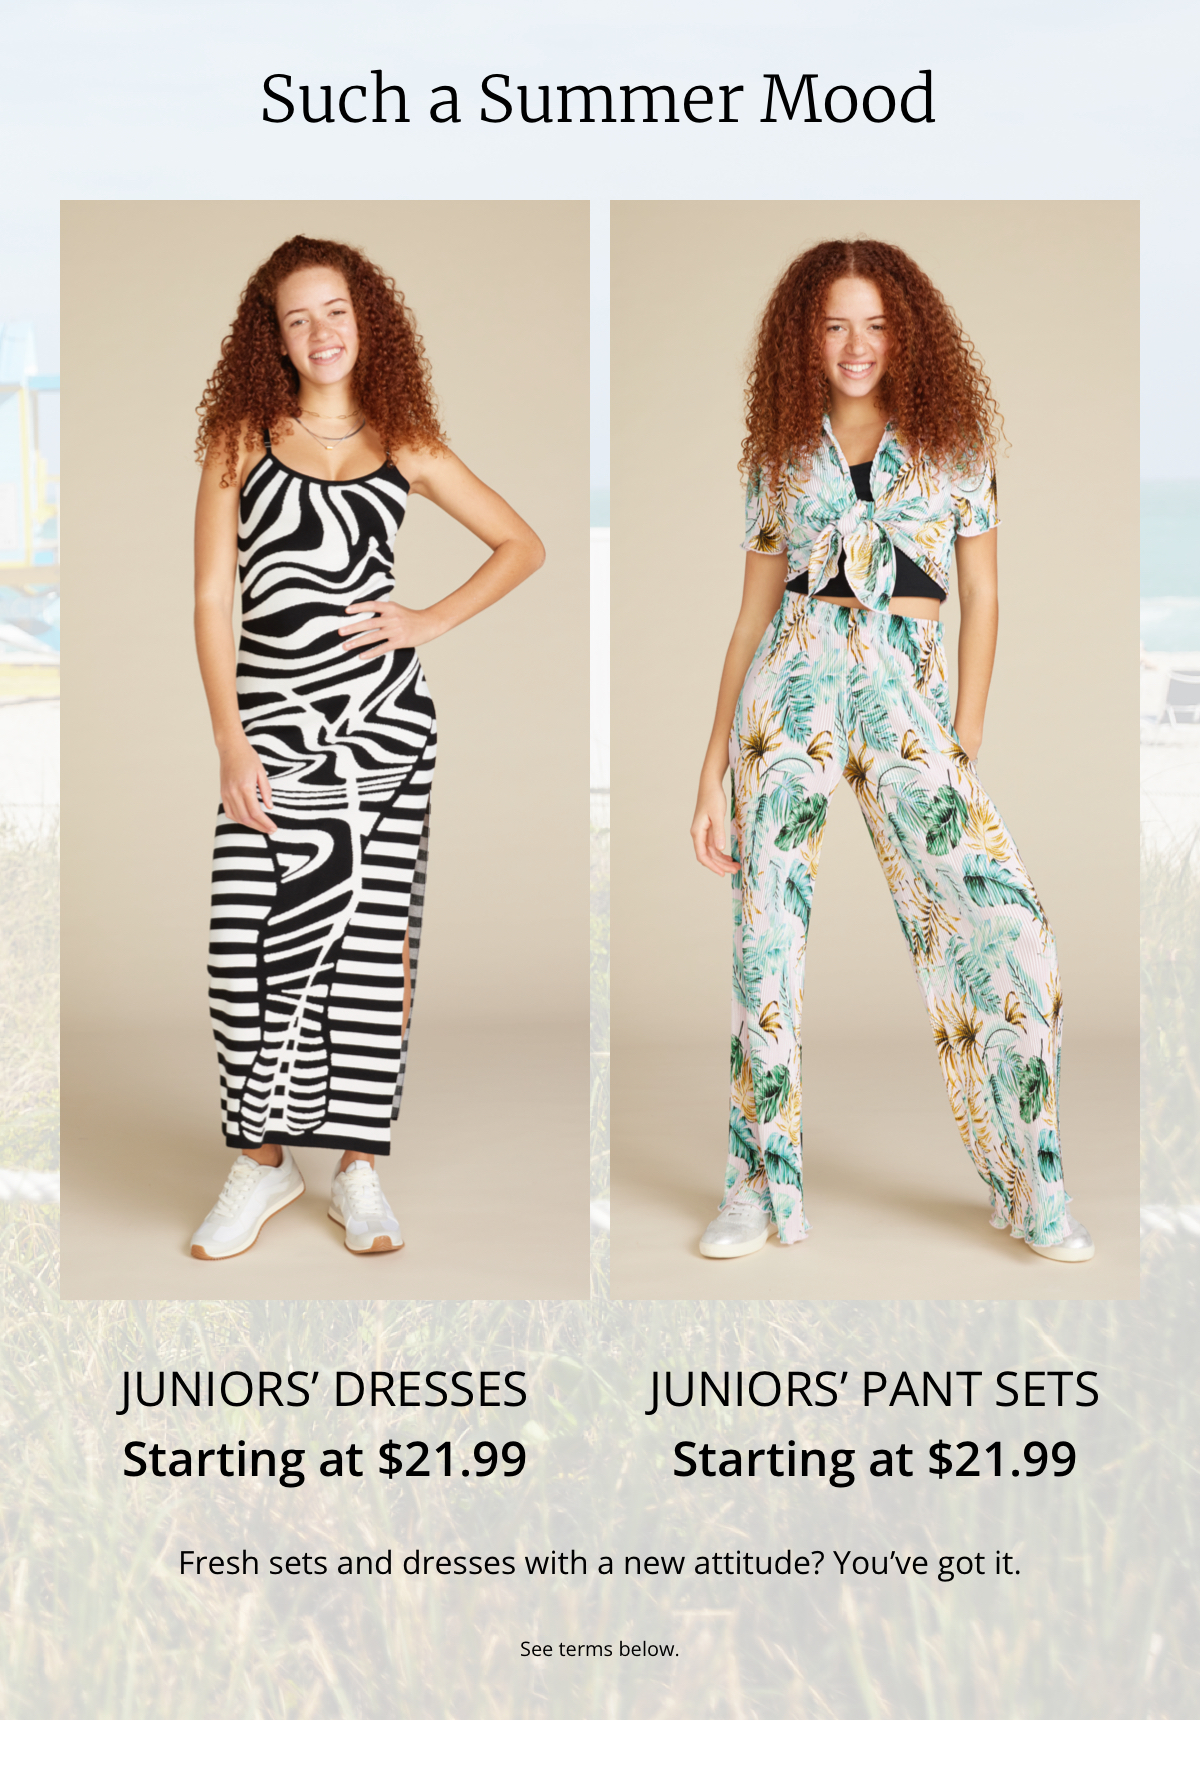 Such a Summer Mood|Juniors Dresses|Starting at $21.99|Juniors Pant Sets|Starting at $21.99|Fresh sets and dresses with a new attitude? Youve got it.|See terms below